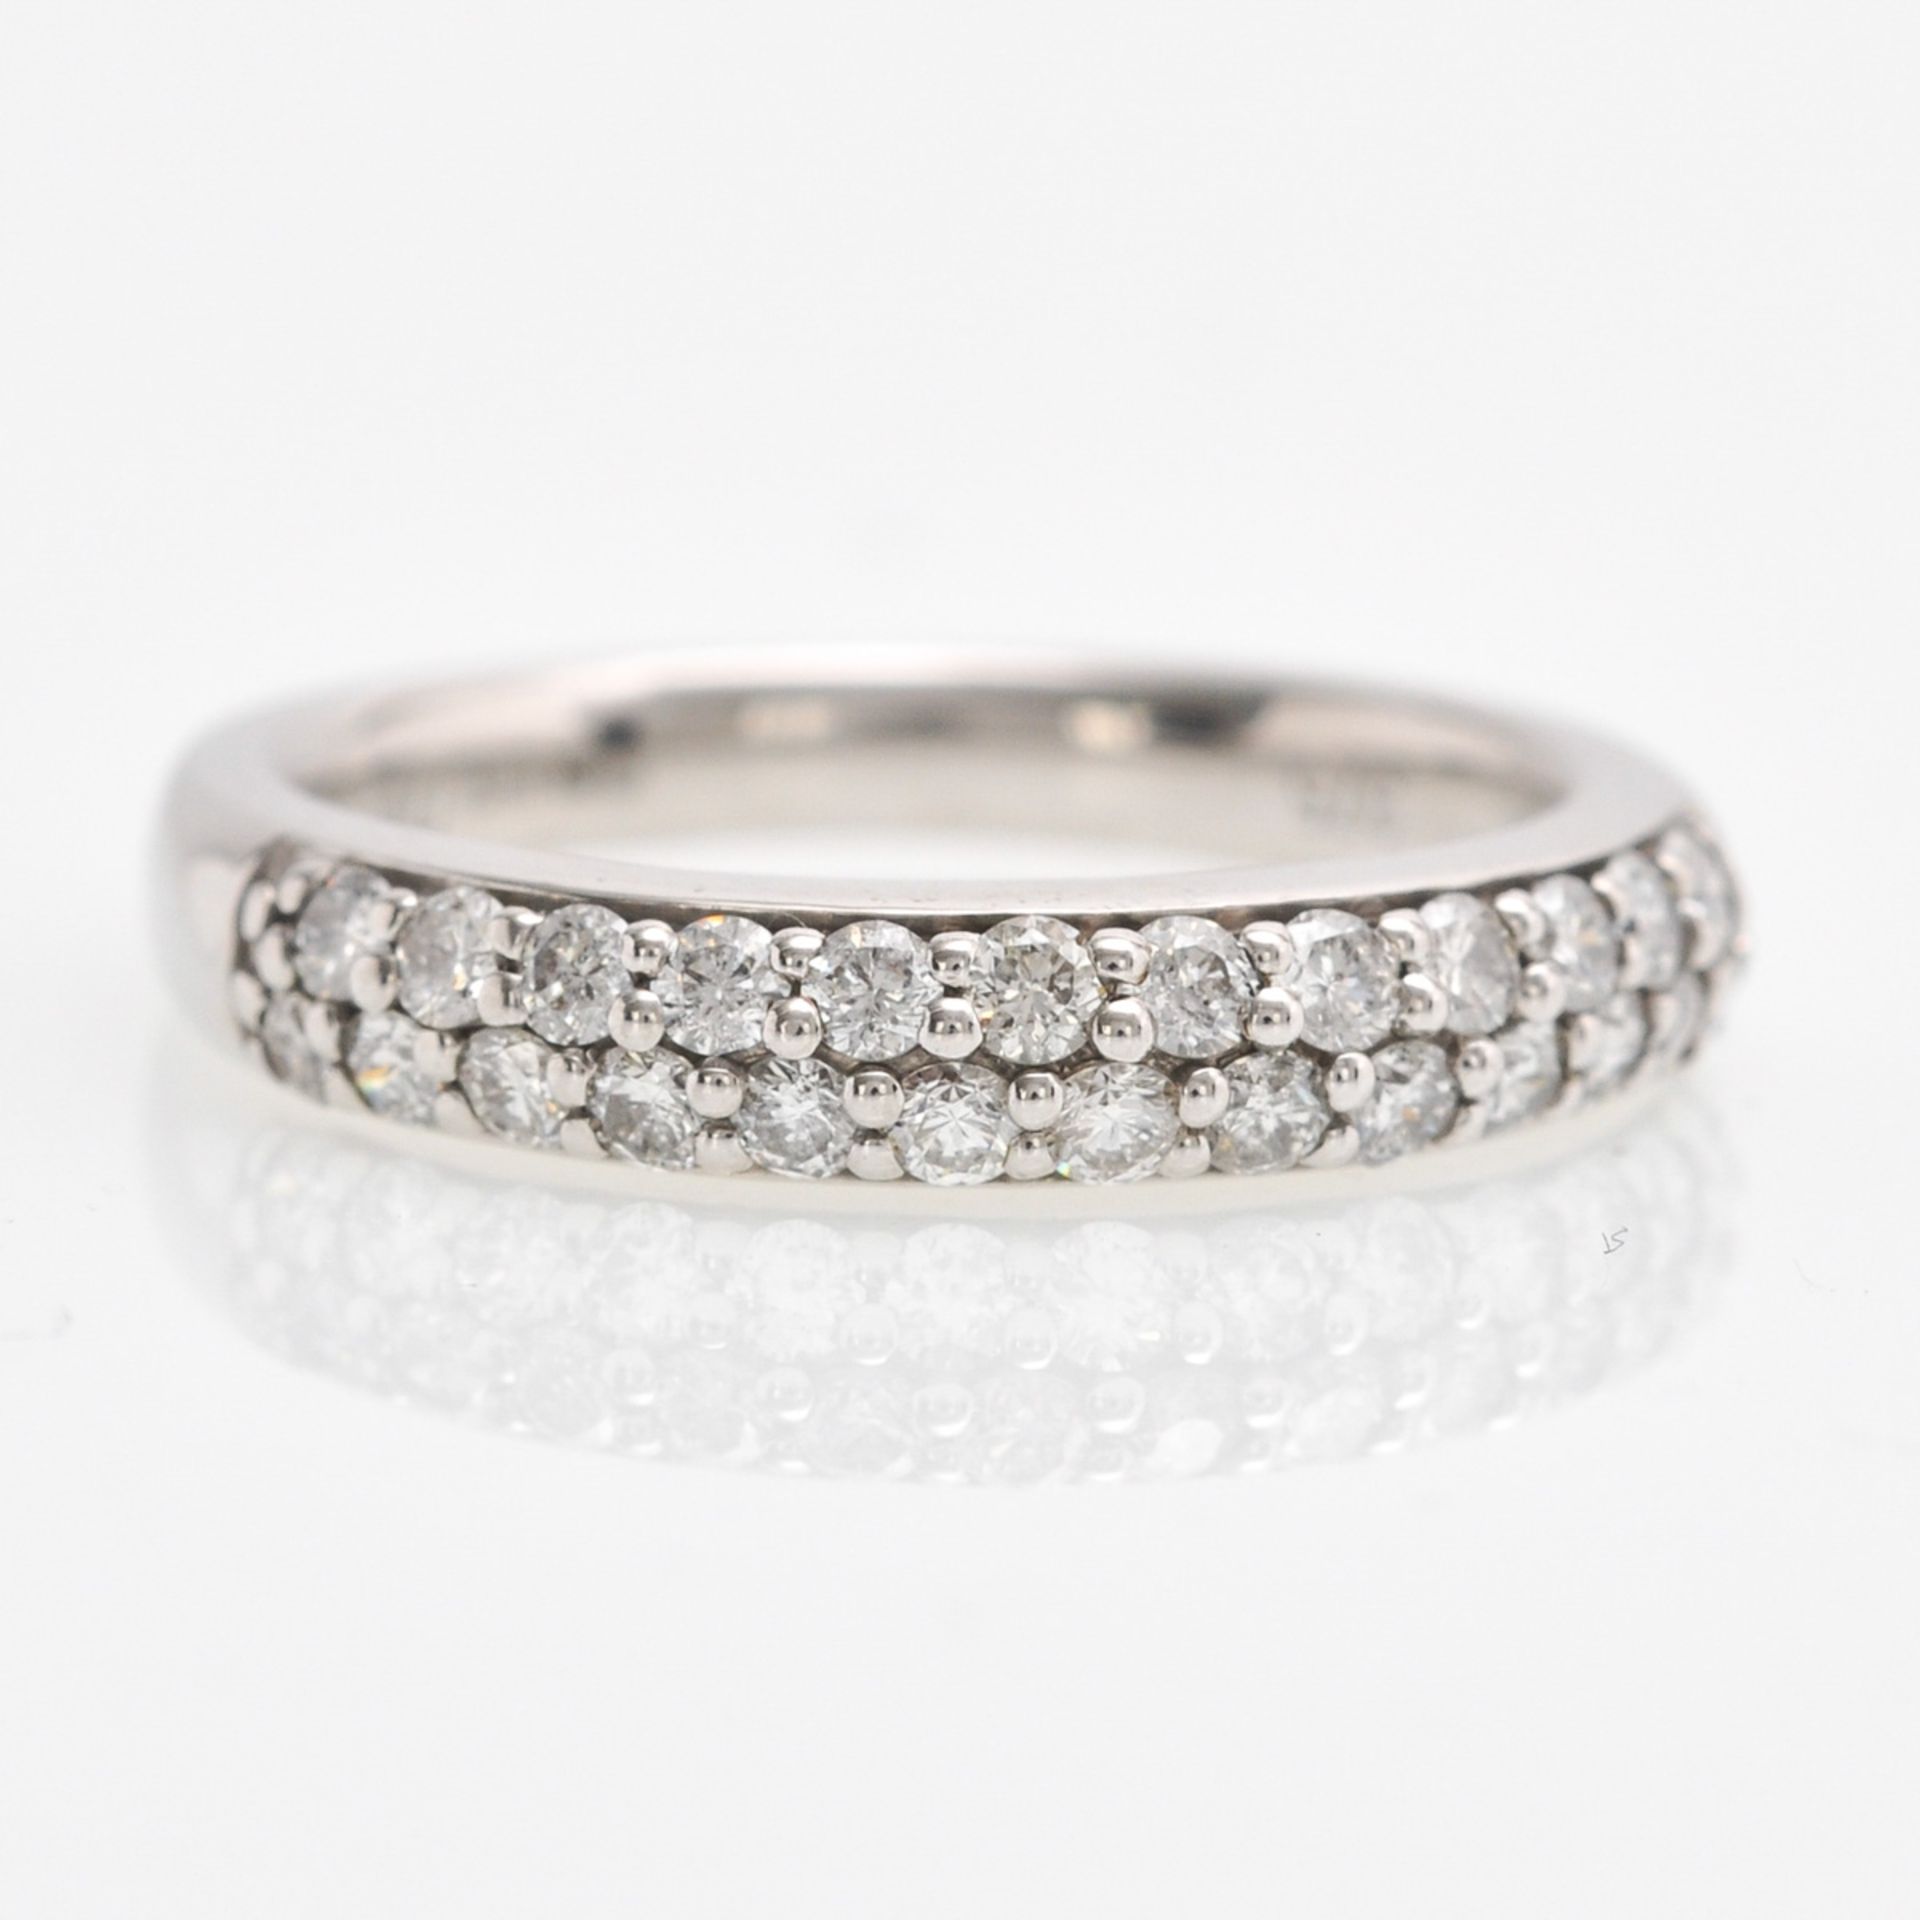 A 9KWG Ladies Diamond Ring Approximately 0.50 CTW